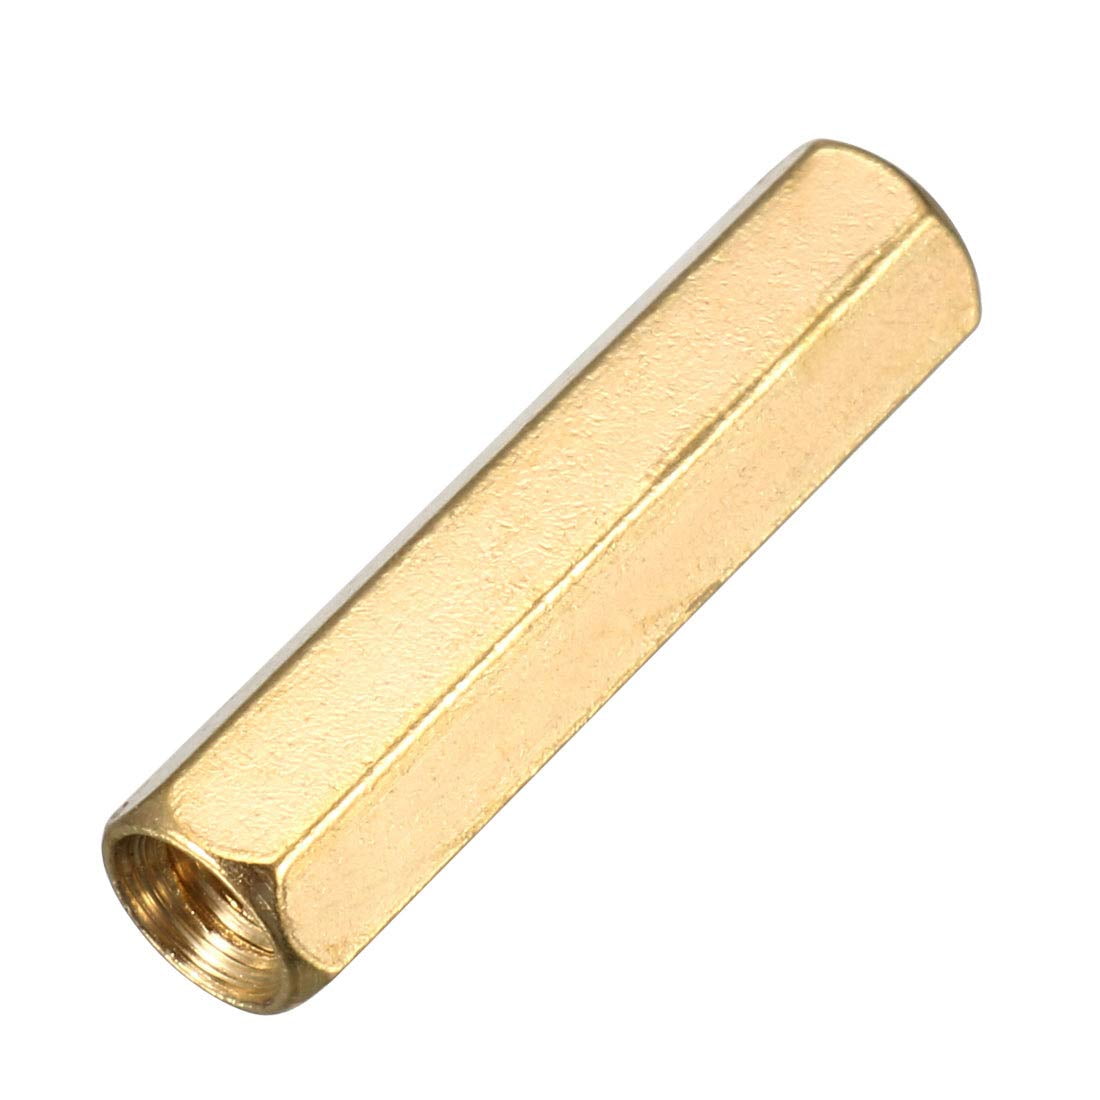 Buy M3x10mm F-F brass hex standoff spacer online at the best price in India